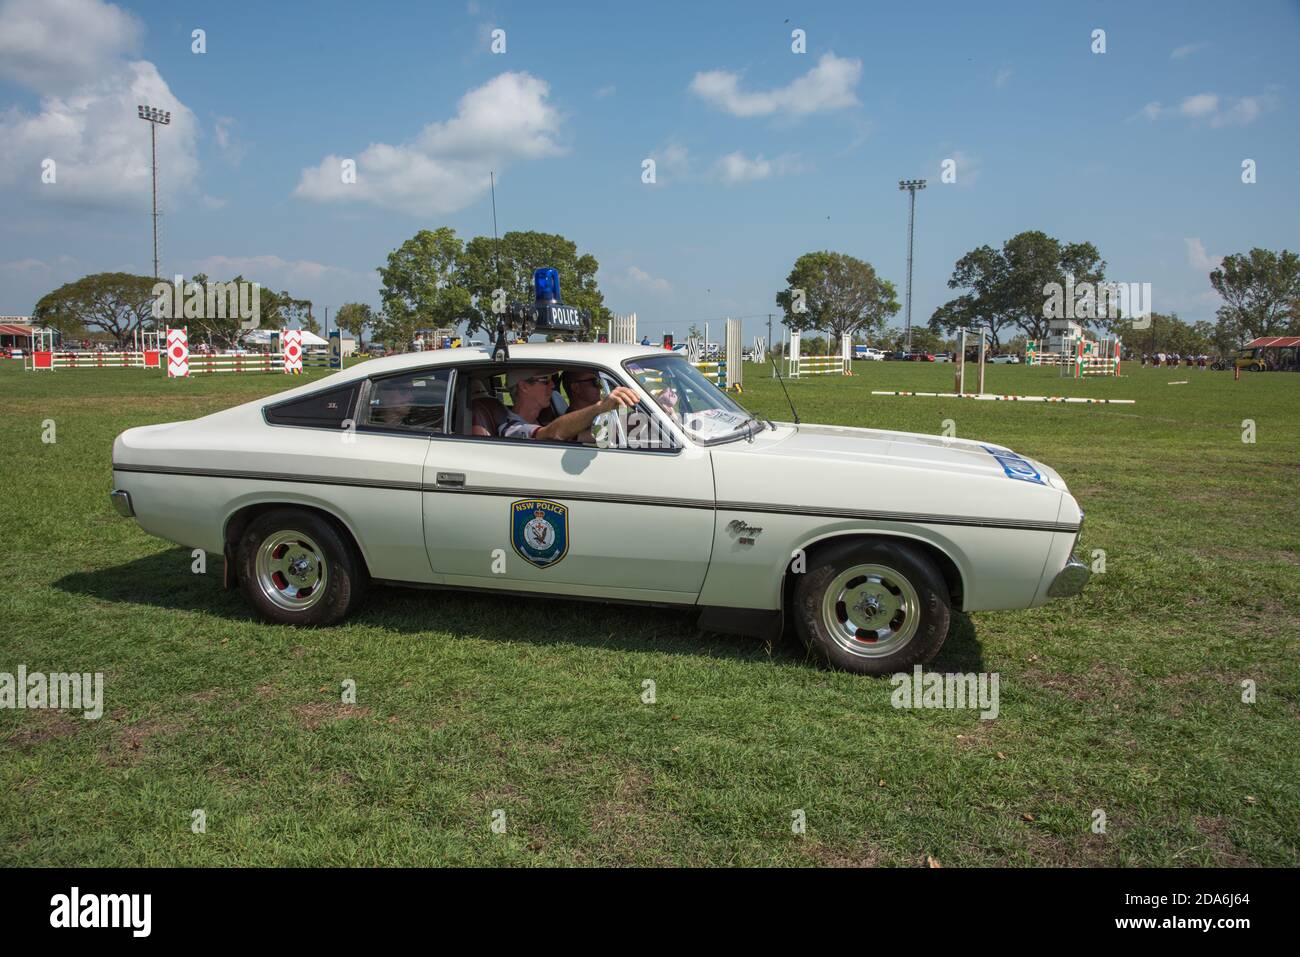 Darwin, NT, Australia-July 27,2018: Vintage car parade with old NSW Police Charger with blue lights at the Darwin Show in the NT of Australia Stock Photo